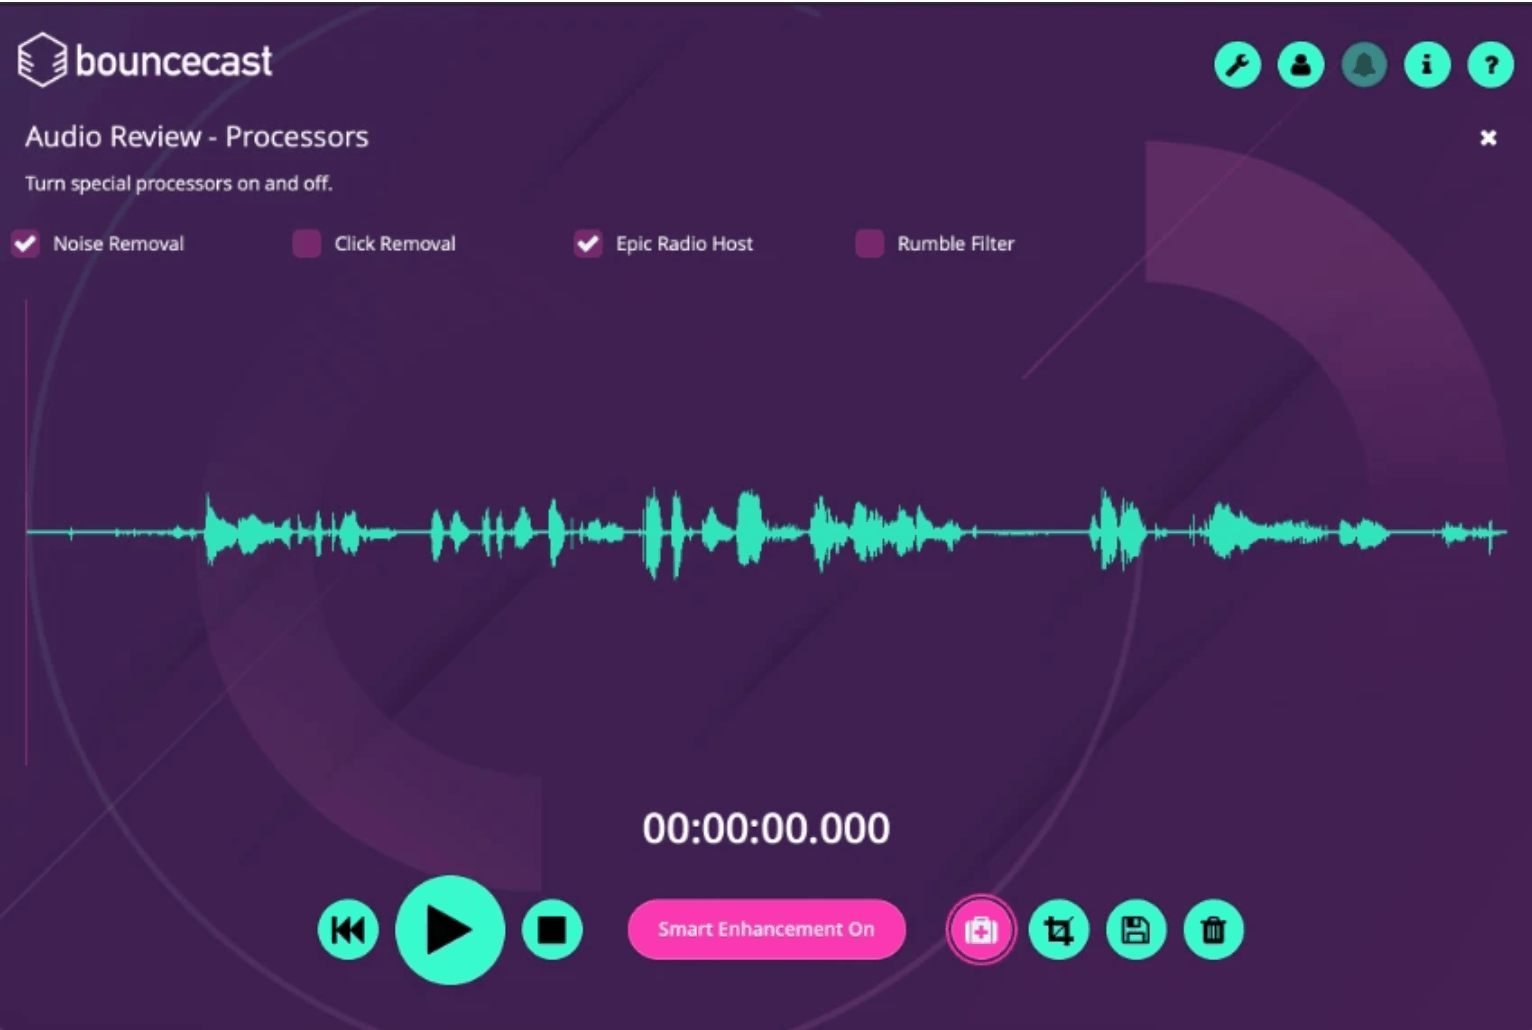 podcast recording software - bouncecast